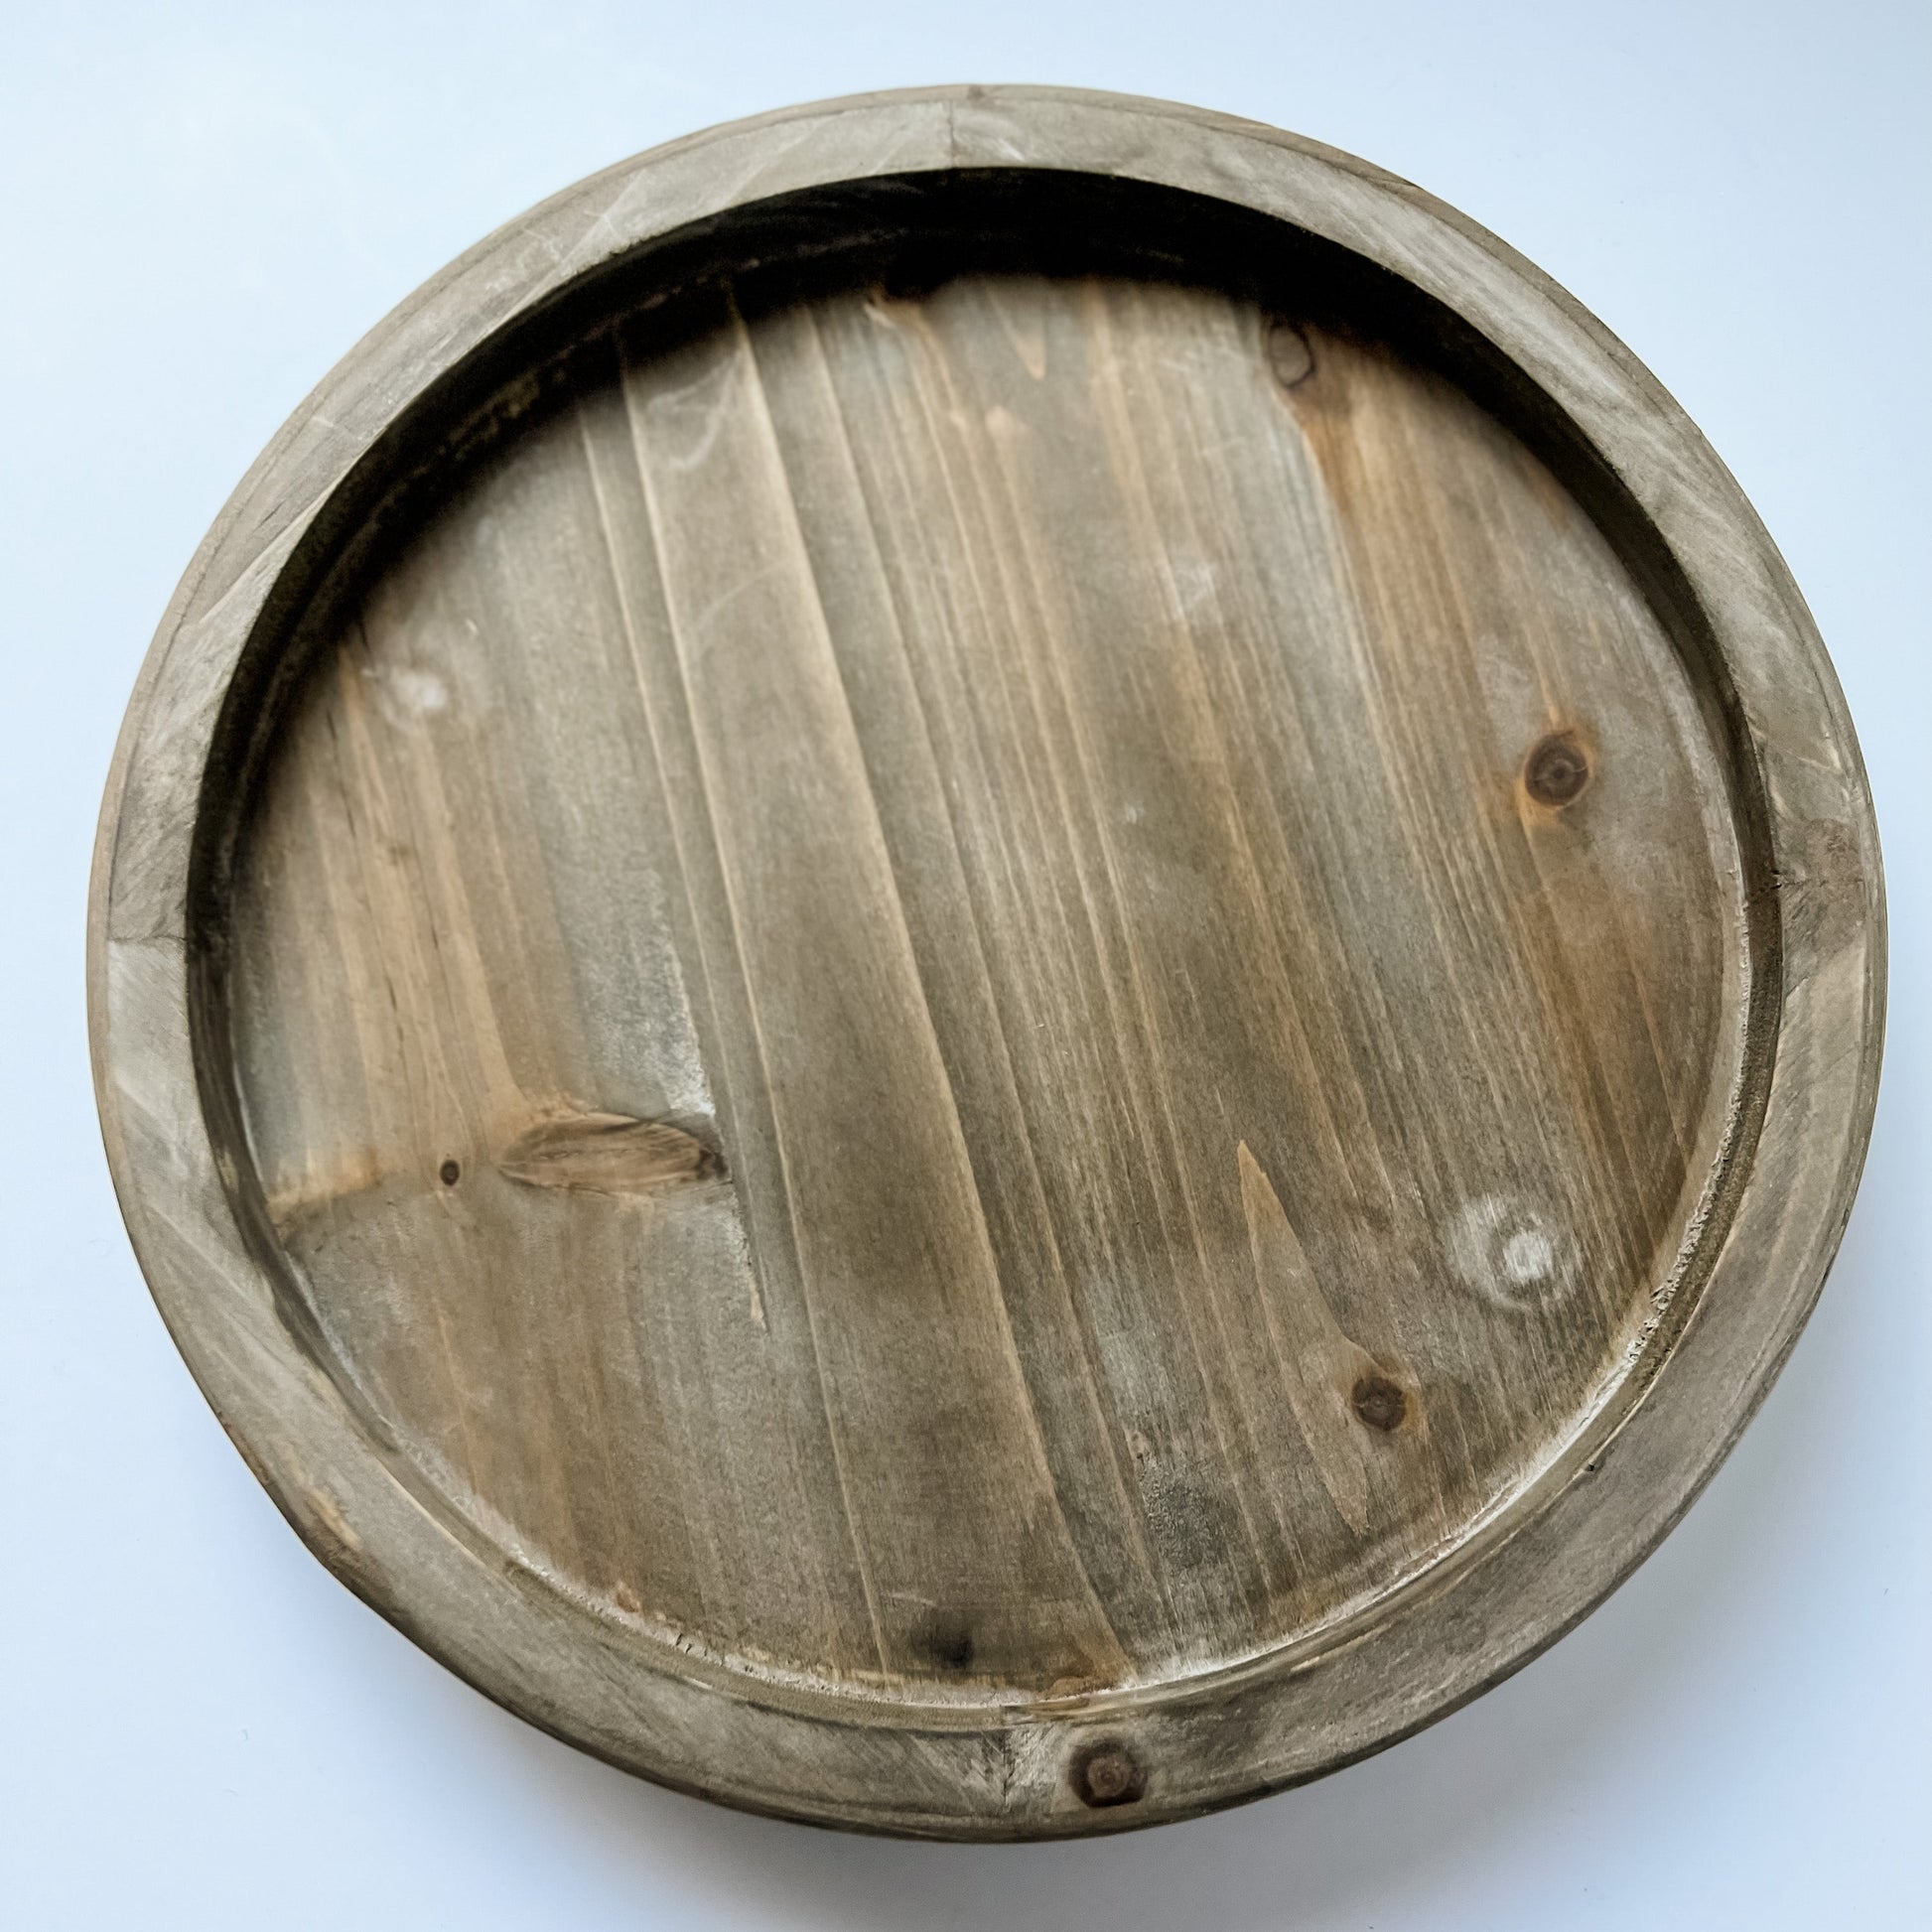 AntiqueFarmHouse - Where would you style our ROUND TRAY WITH